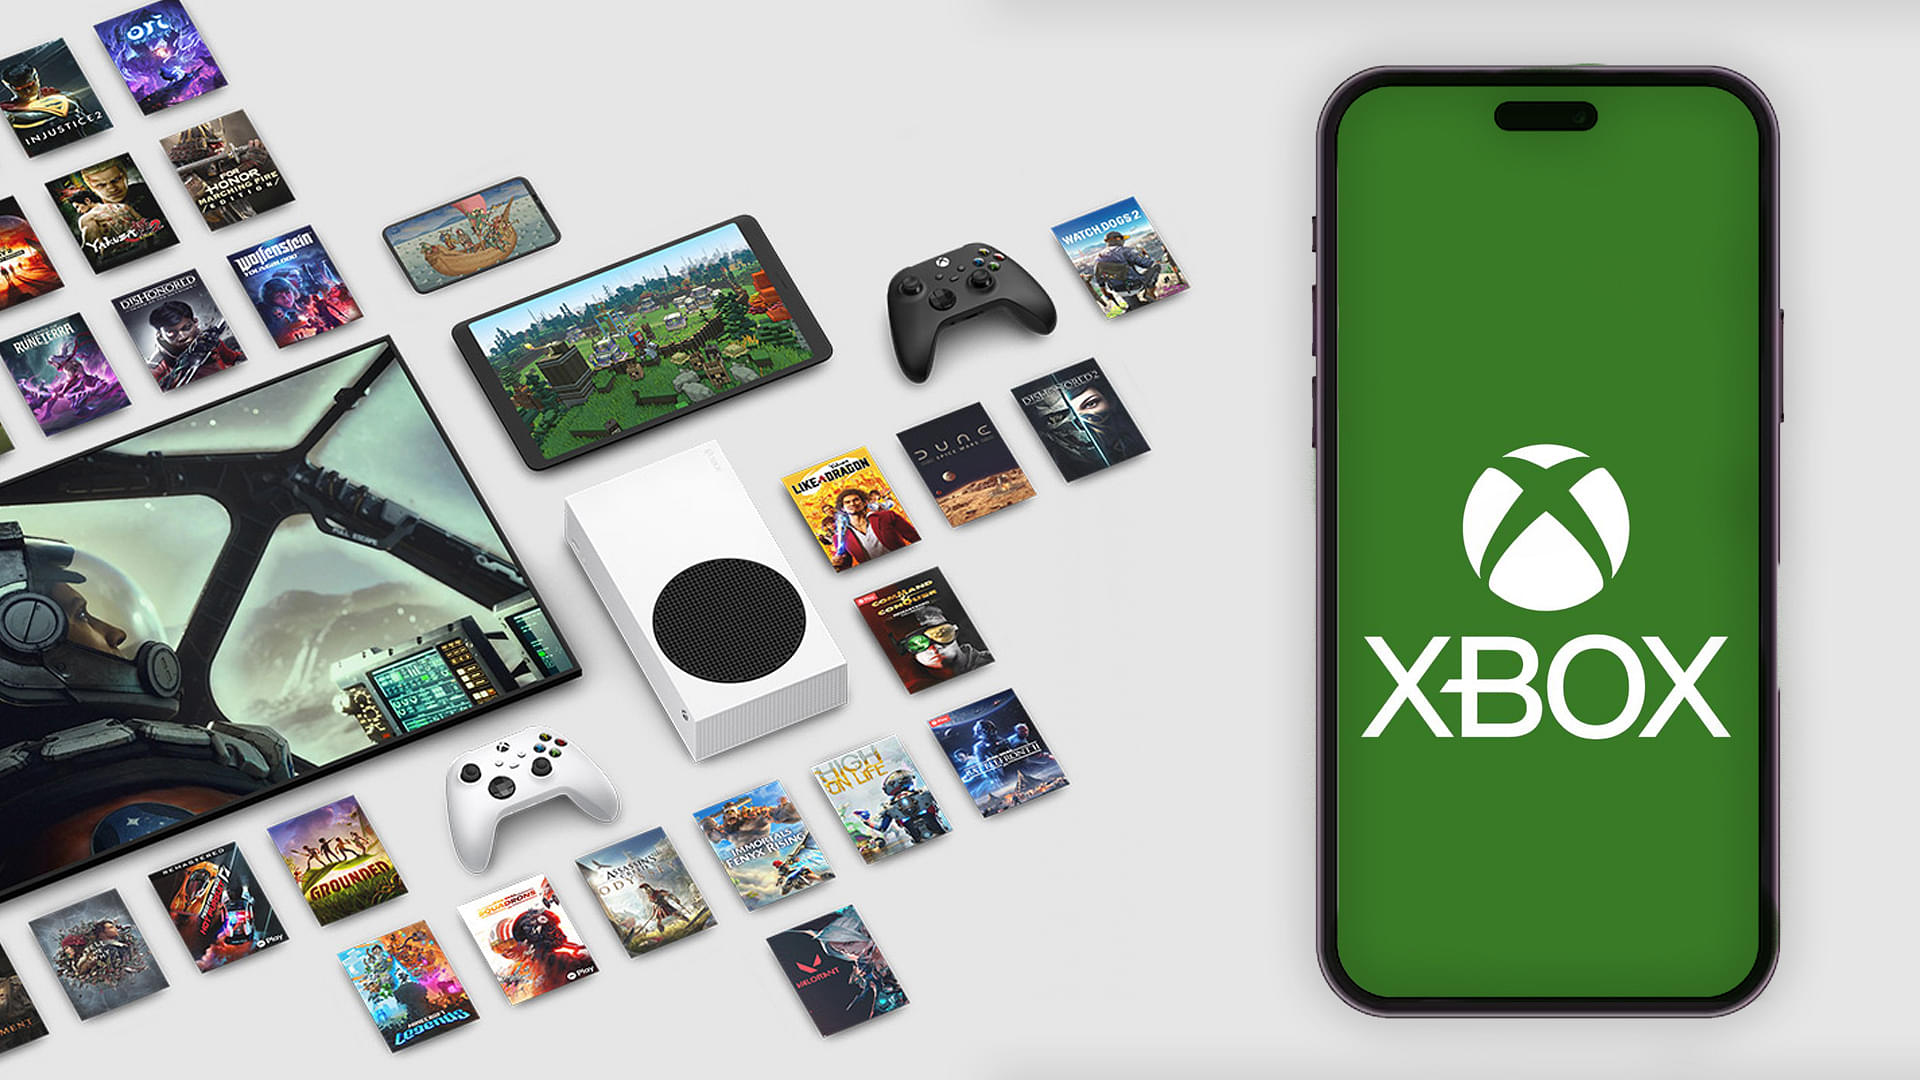 An image showing Xbox mobile store app concept